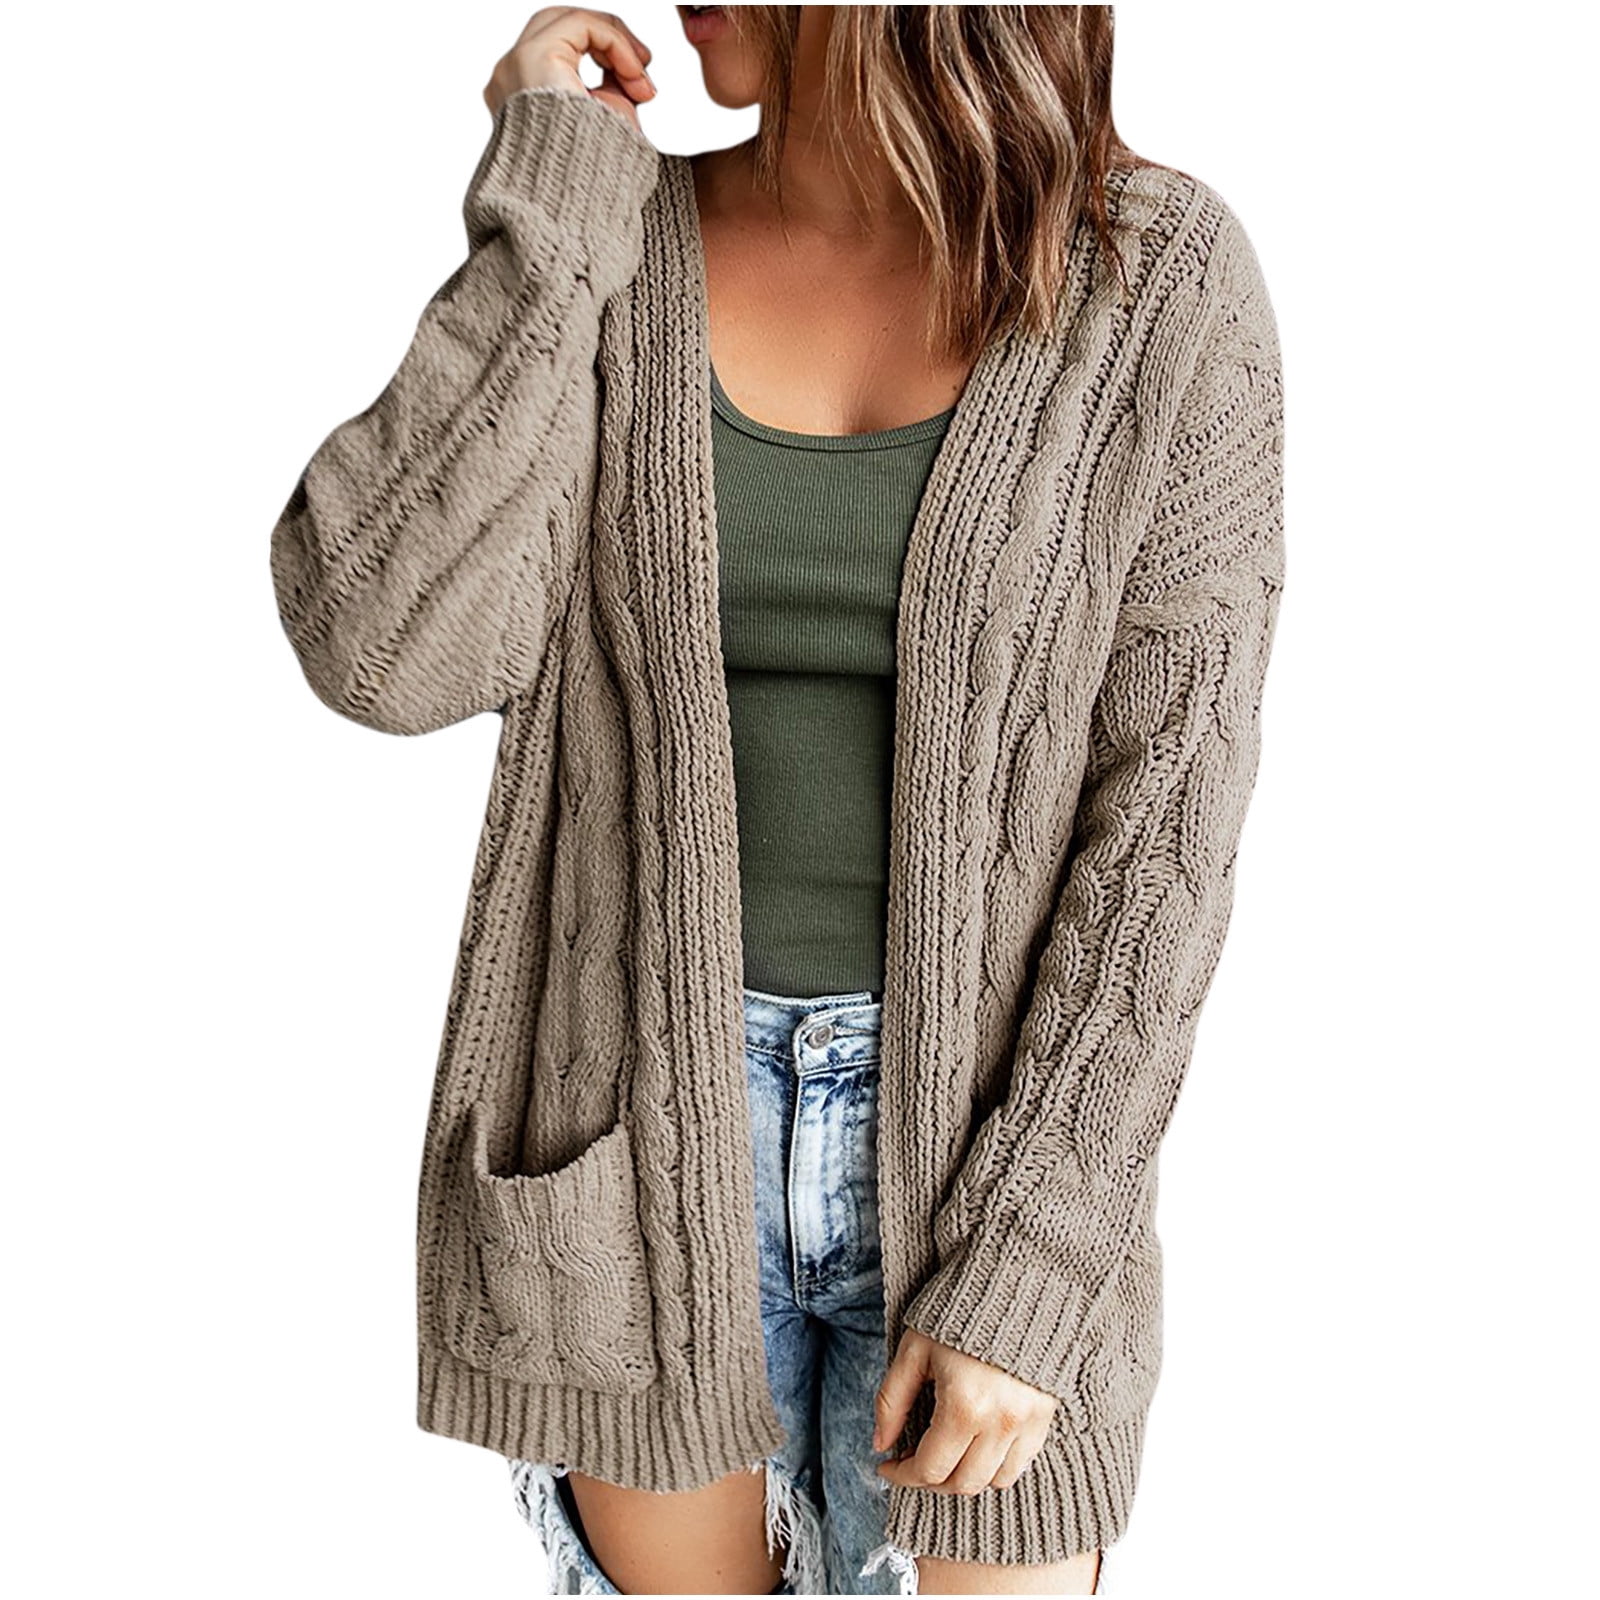 Women Casual Long Sleeve Loose Tops Knitted Solid Sweater Cardigan Coat Outwear 